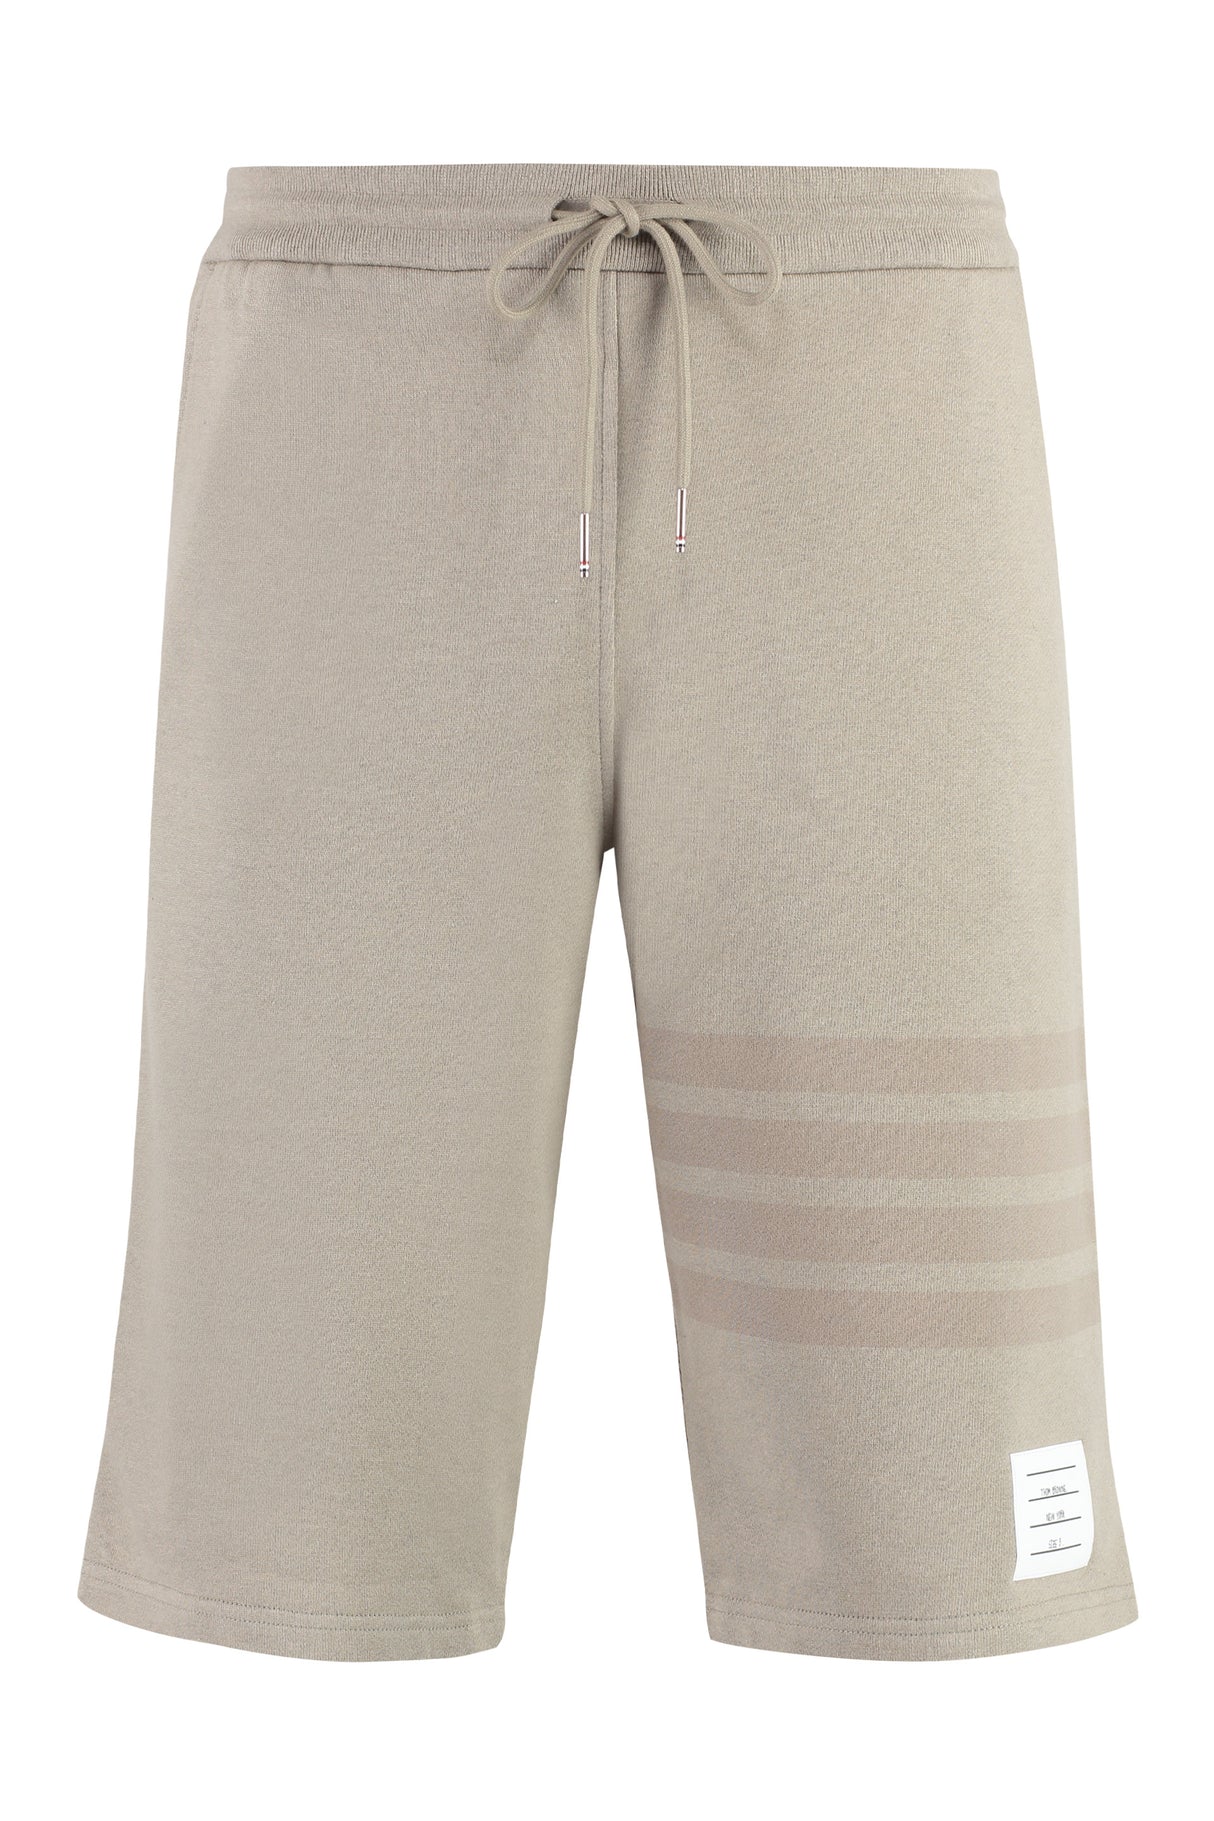 THOM BROWNE Men's Beige Cotton Shorts with Striped and Tricolor Details in Size 46IT